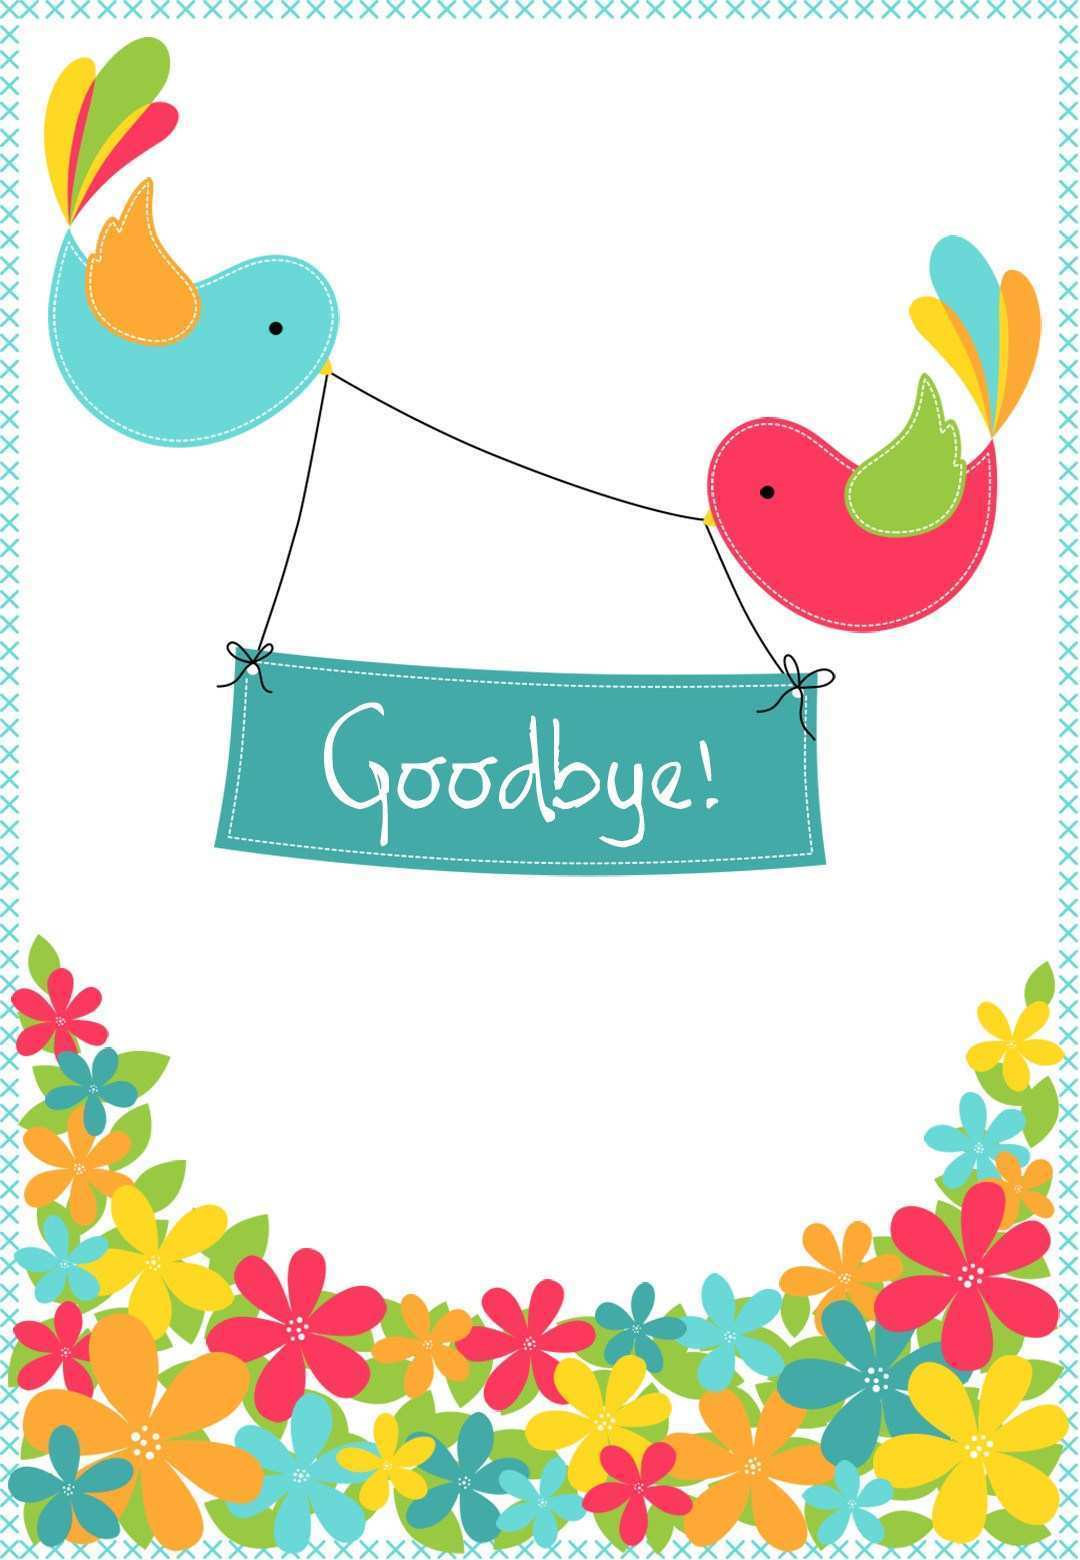 24 Create Free Farewell Card Template Word in Photoshop for Free Intended For Goodbye Card Template